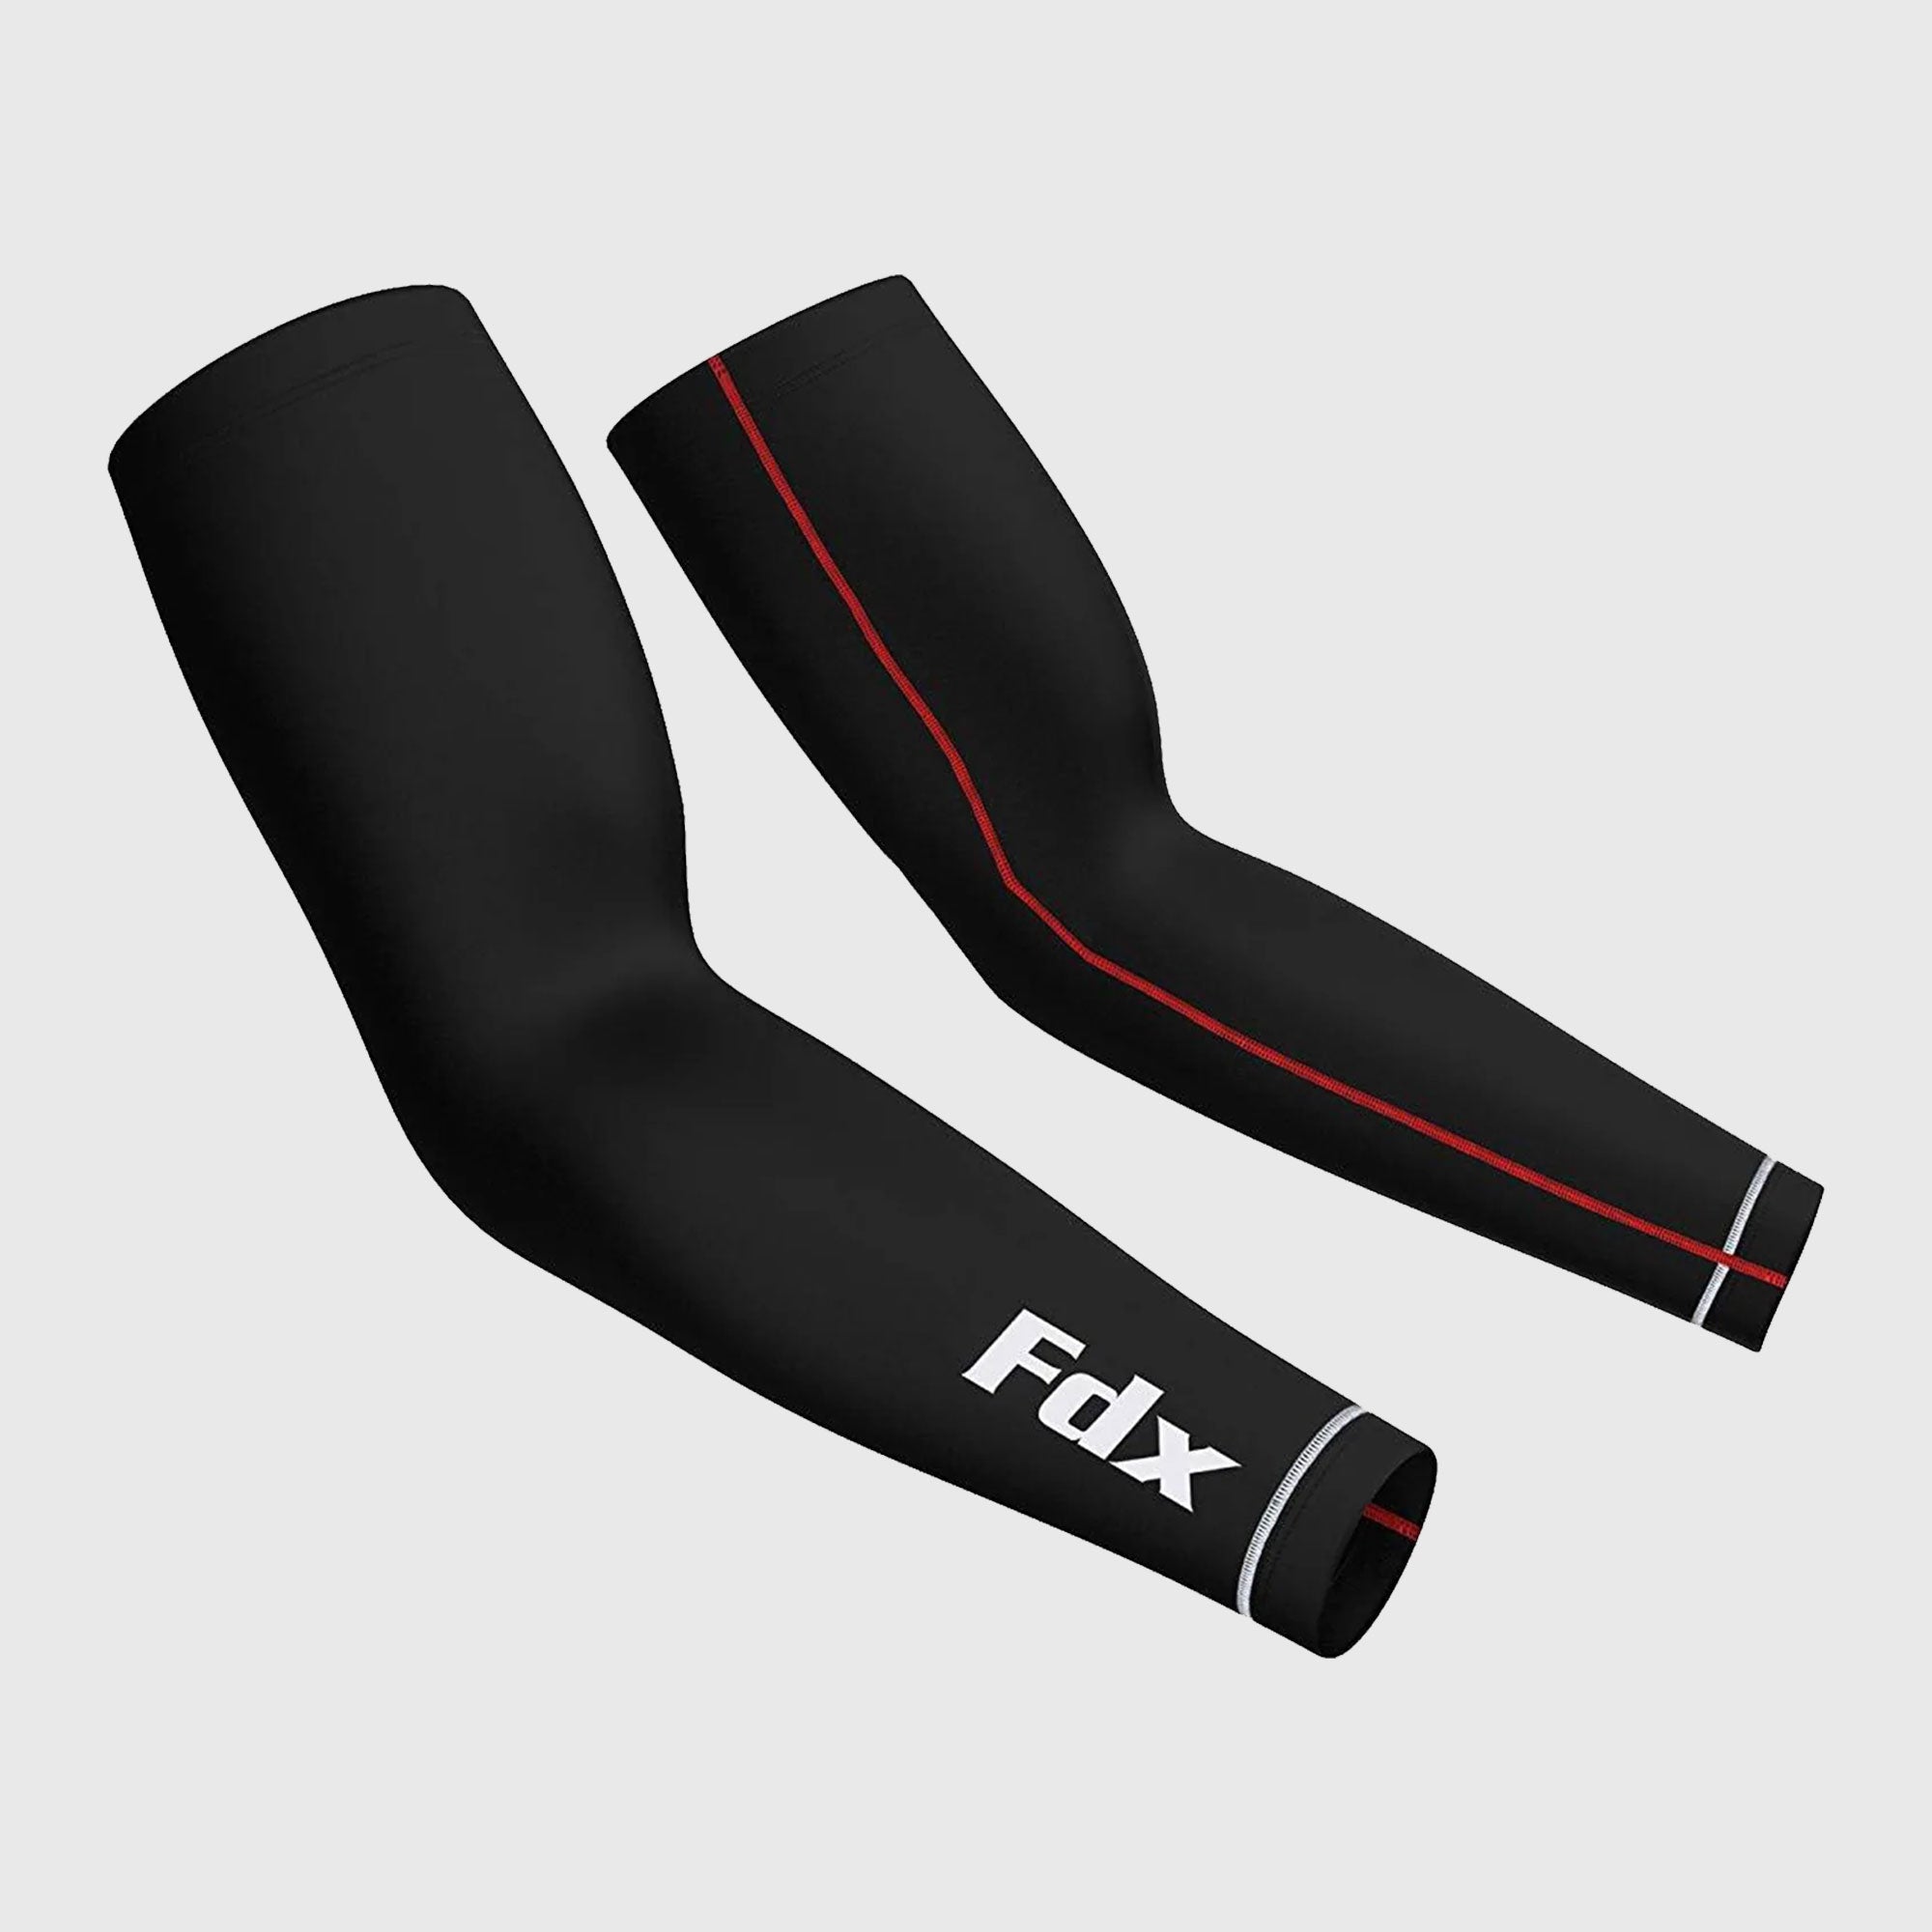 Fdx Unisex Black Cycling Arm Warmer Lightweight Cold Weather Elbow Compression Arm Sleeve Sun Protective Cool Men Women Cycling Gear AU